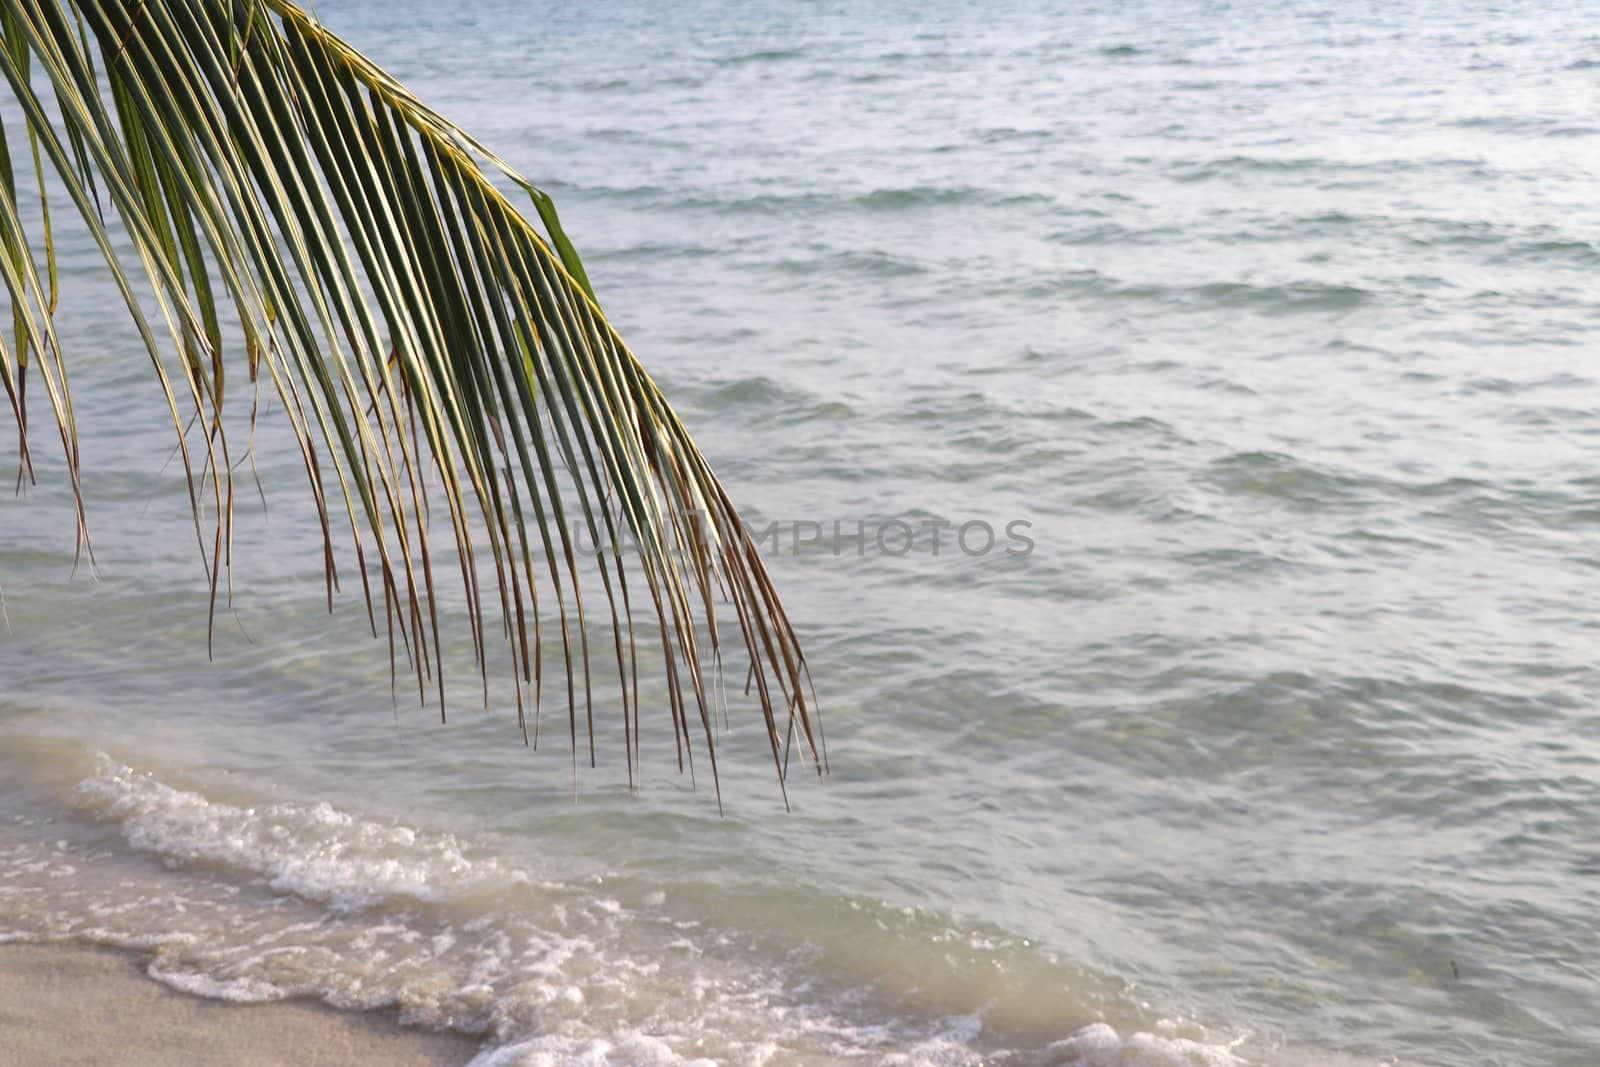 The stem of the coconut tree with a beach background. by Eungsuwat